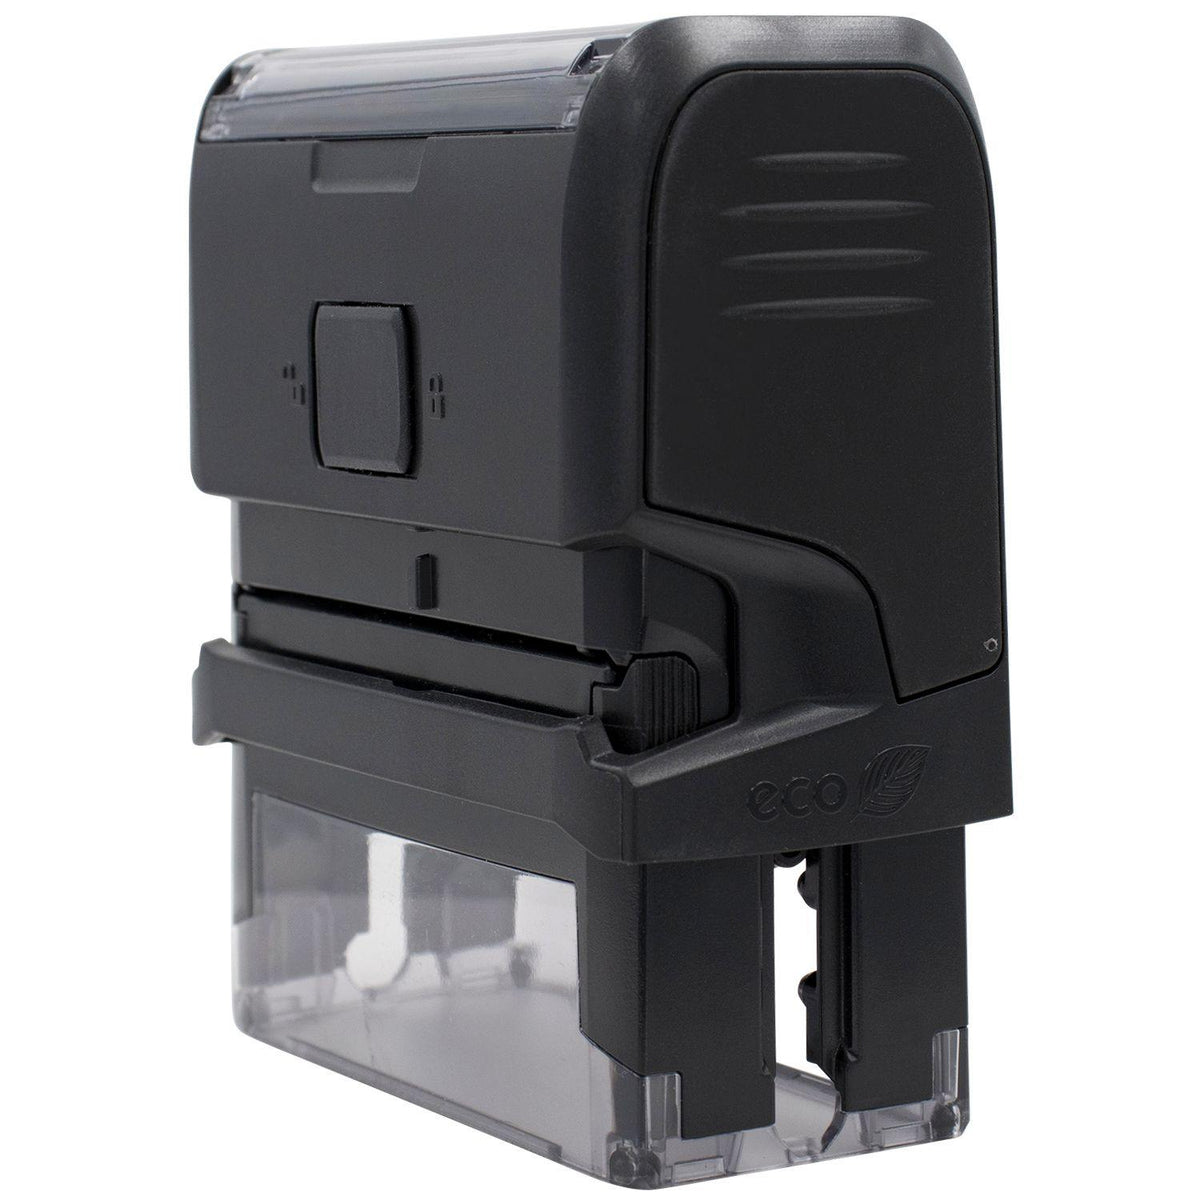 Side View of Large Self-Inking Bold X-Rays Stamp at an Angle